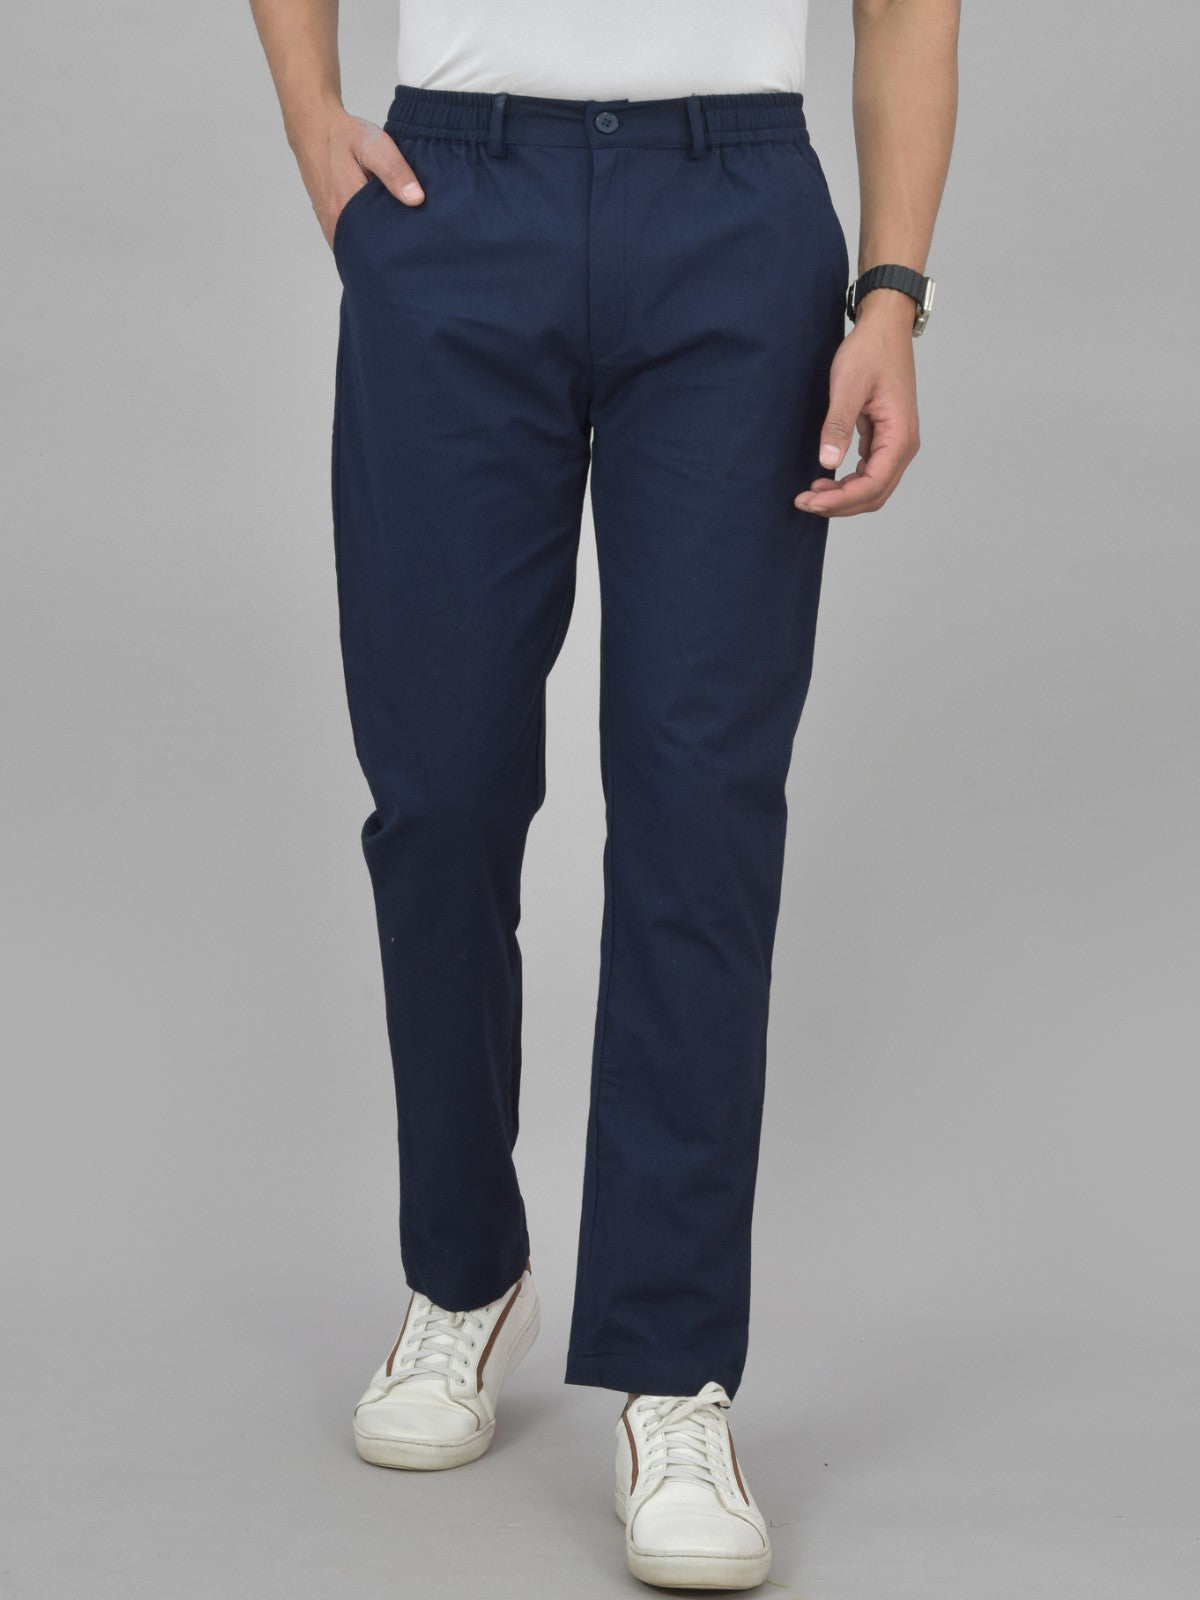 Combo Pack Of Mens Grey And Navy Blue Regualr Fit Cotton Trouser